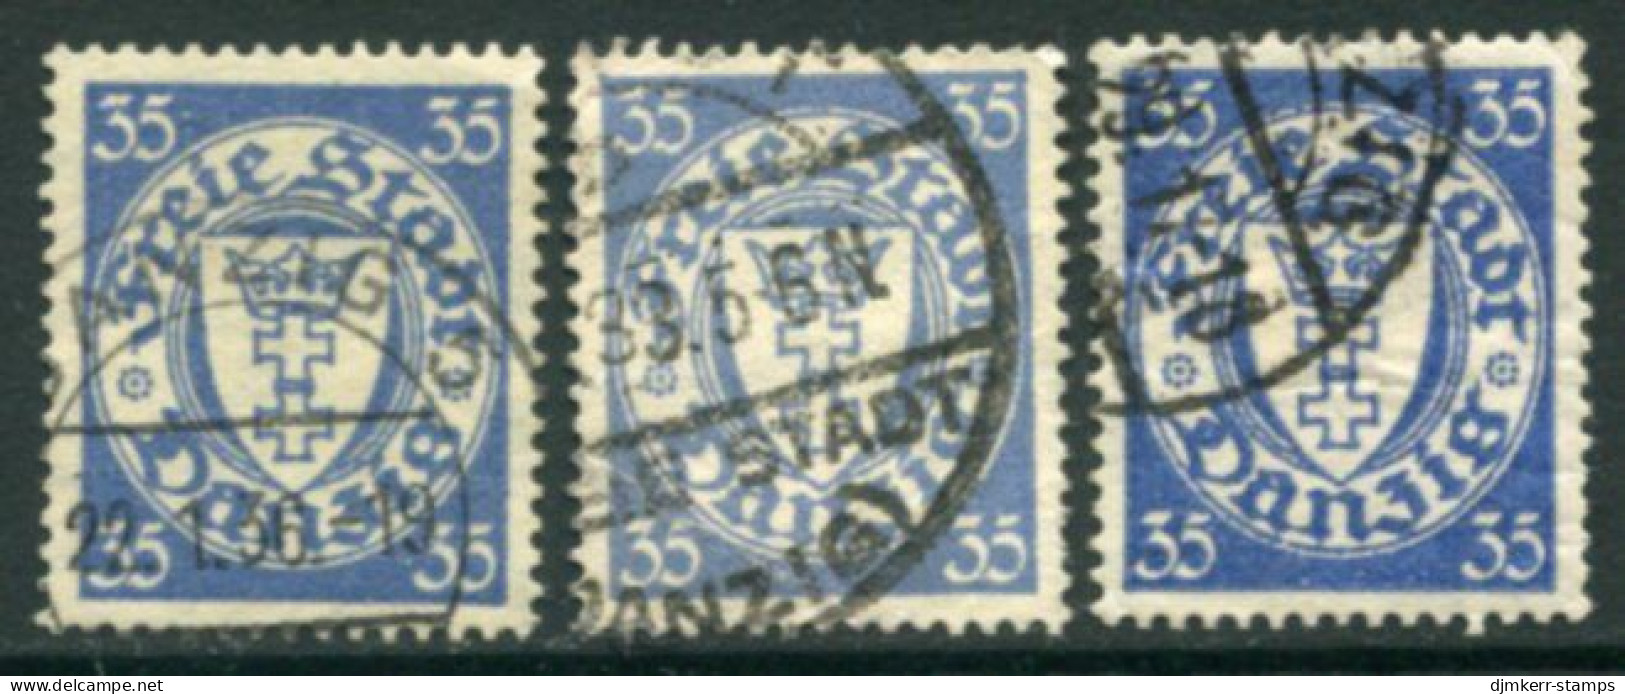 DANZIG 1925-31 Arms Definitive 35 Pf. All Three Shades, Used.. Michel Spez.  215a,b,c  €15.80 - Used